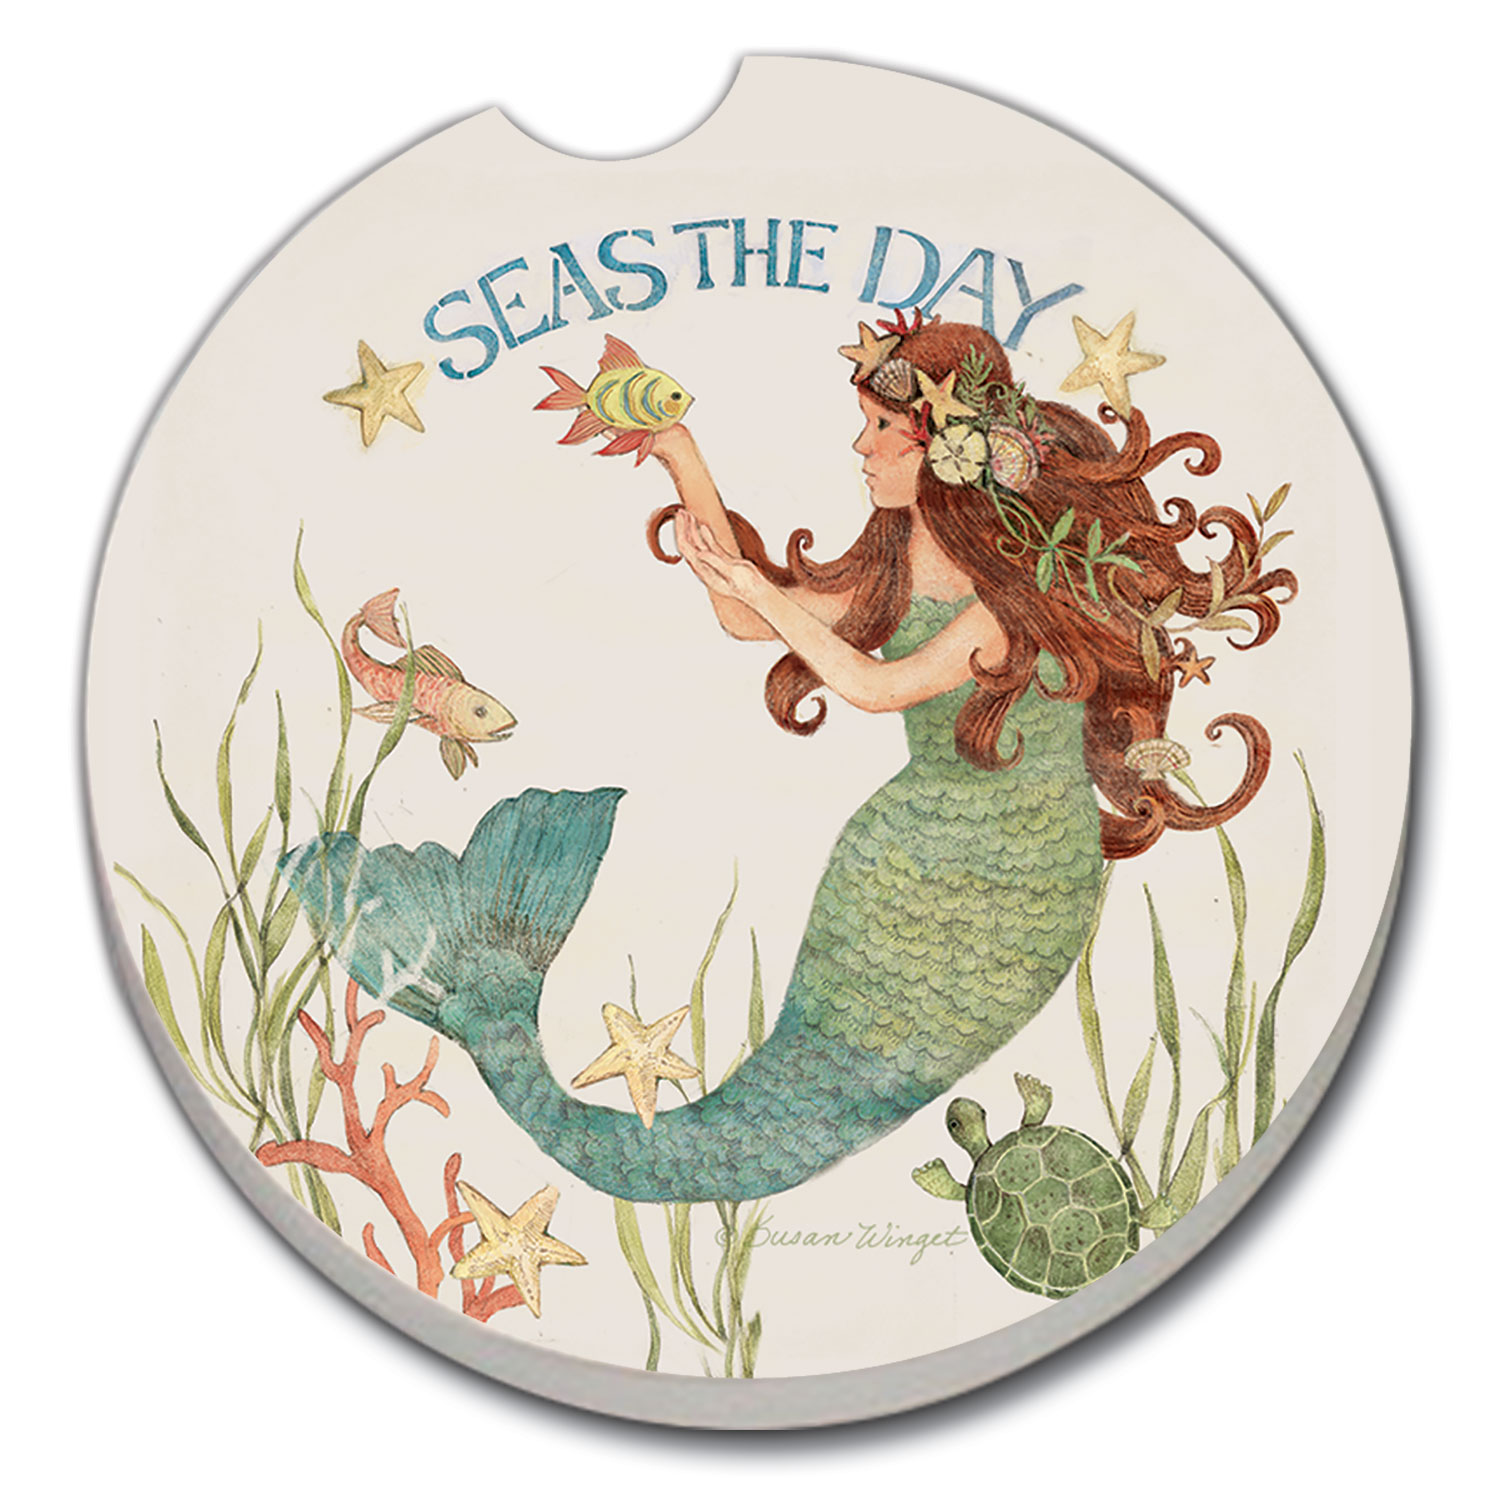 08770: SEAS OF THE DAY MERMAID ABSORBENT STONE CAR COASTER - COUNTER ART